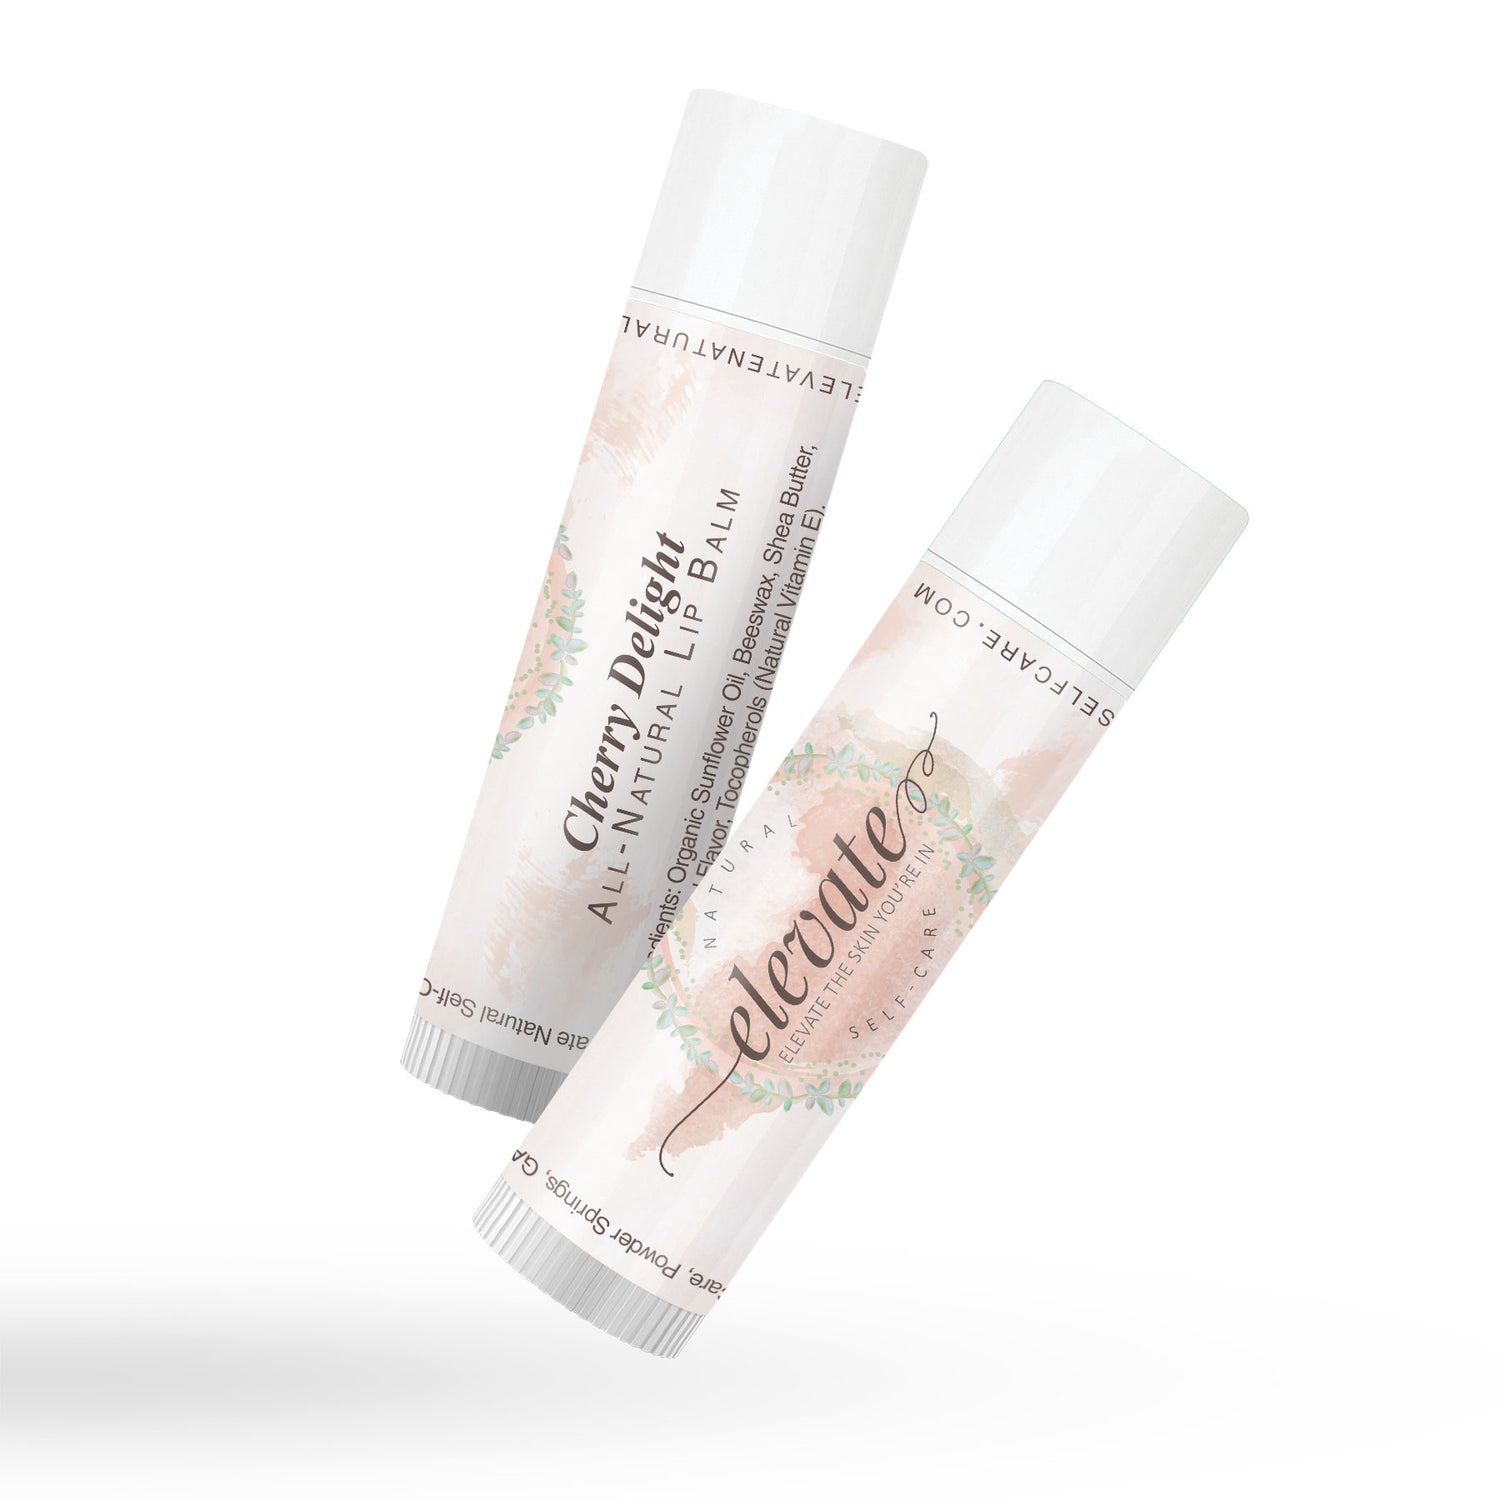 Cherry Delight All-Natural Lip Balm will naturally revitalize lips with our long-lasting conditioning lip balm made with sustainable and locally sourced beeswax, moisturizing shea butter, sunflower oil, and vitamin E oil with a delightfully natural cherry-scented flavor oil. 